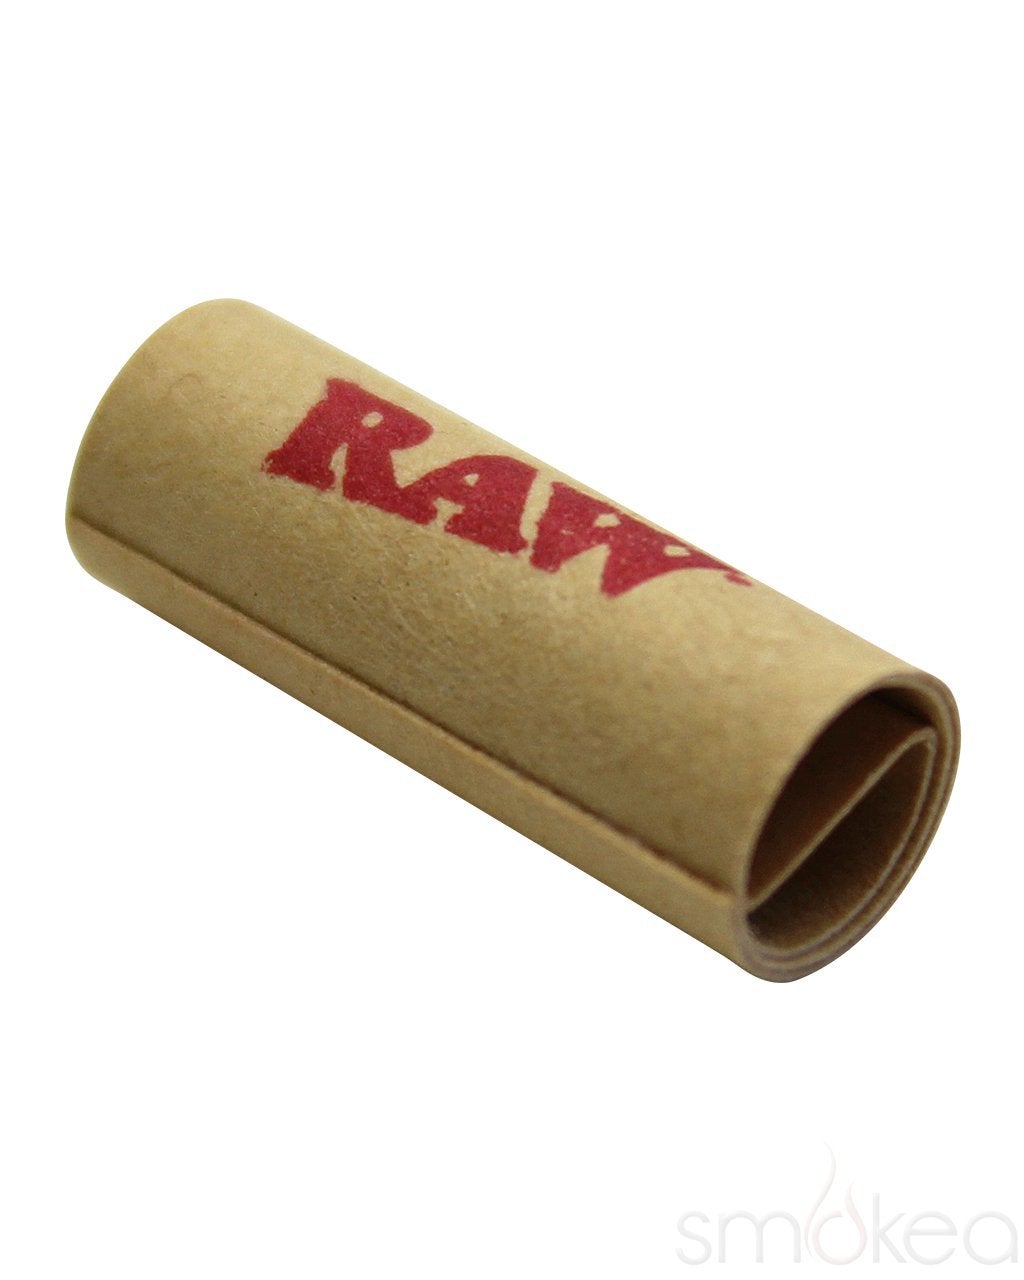  100 Raw PRE-Rolled Tips with Raw Storage Tin, 1 Pack